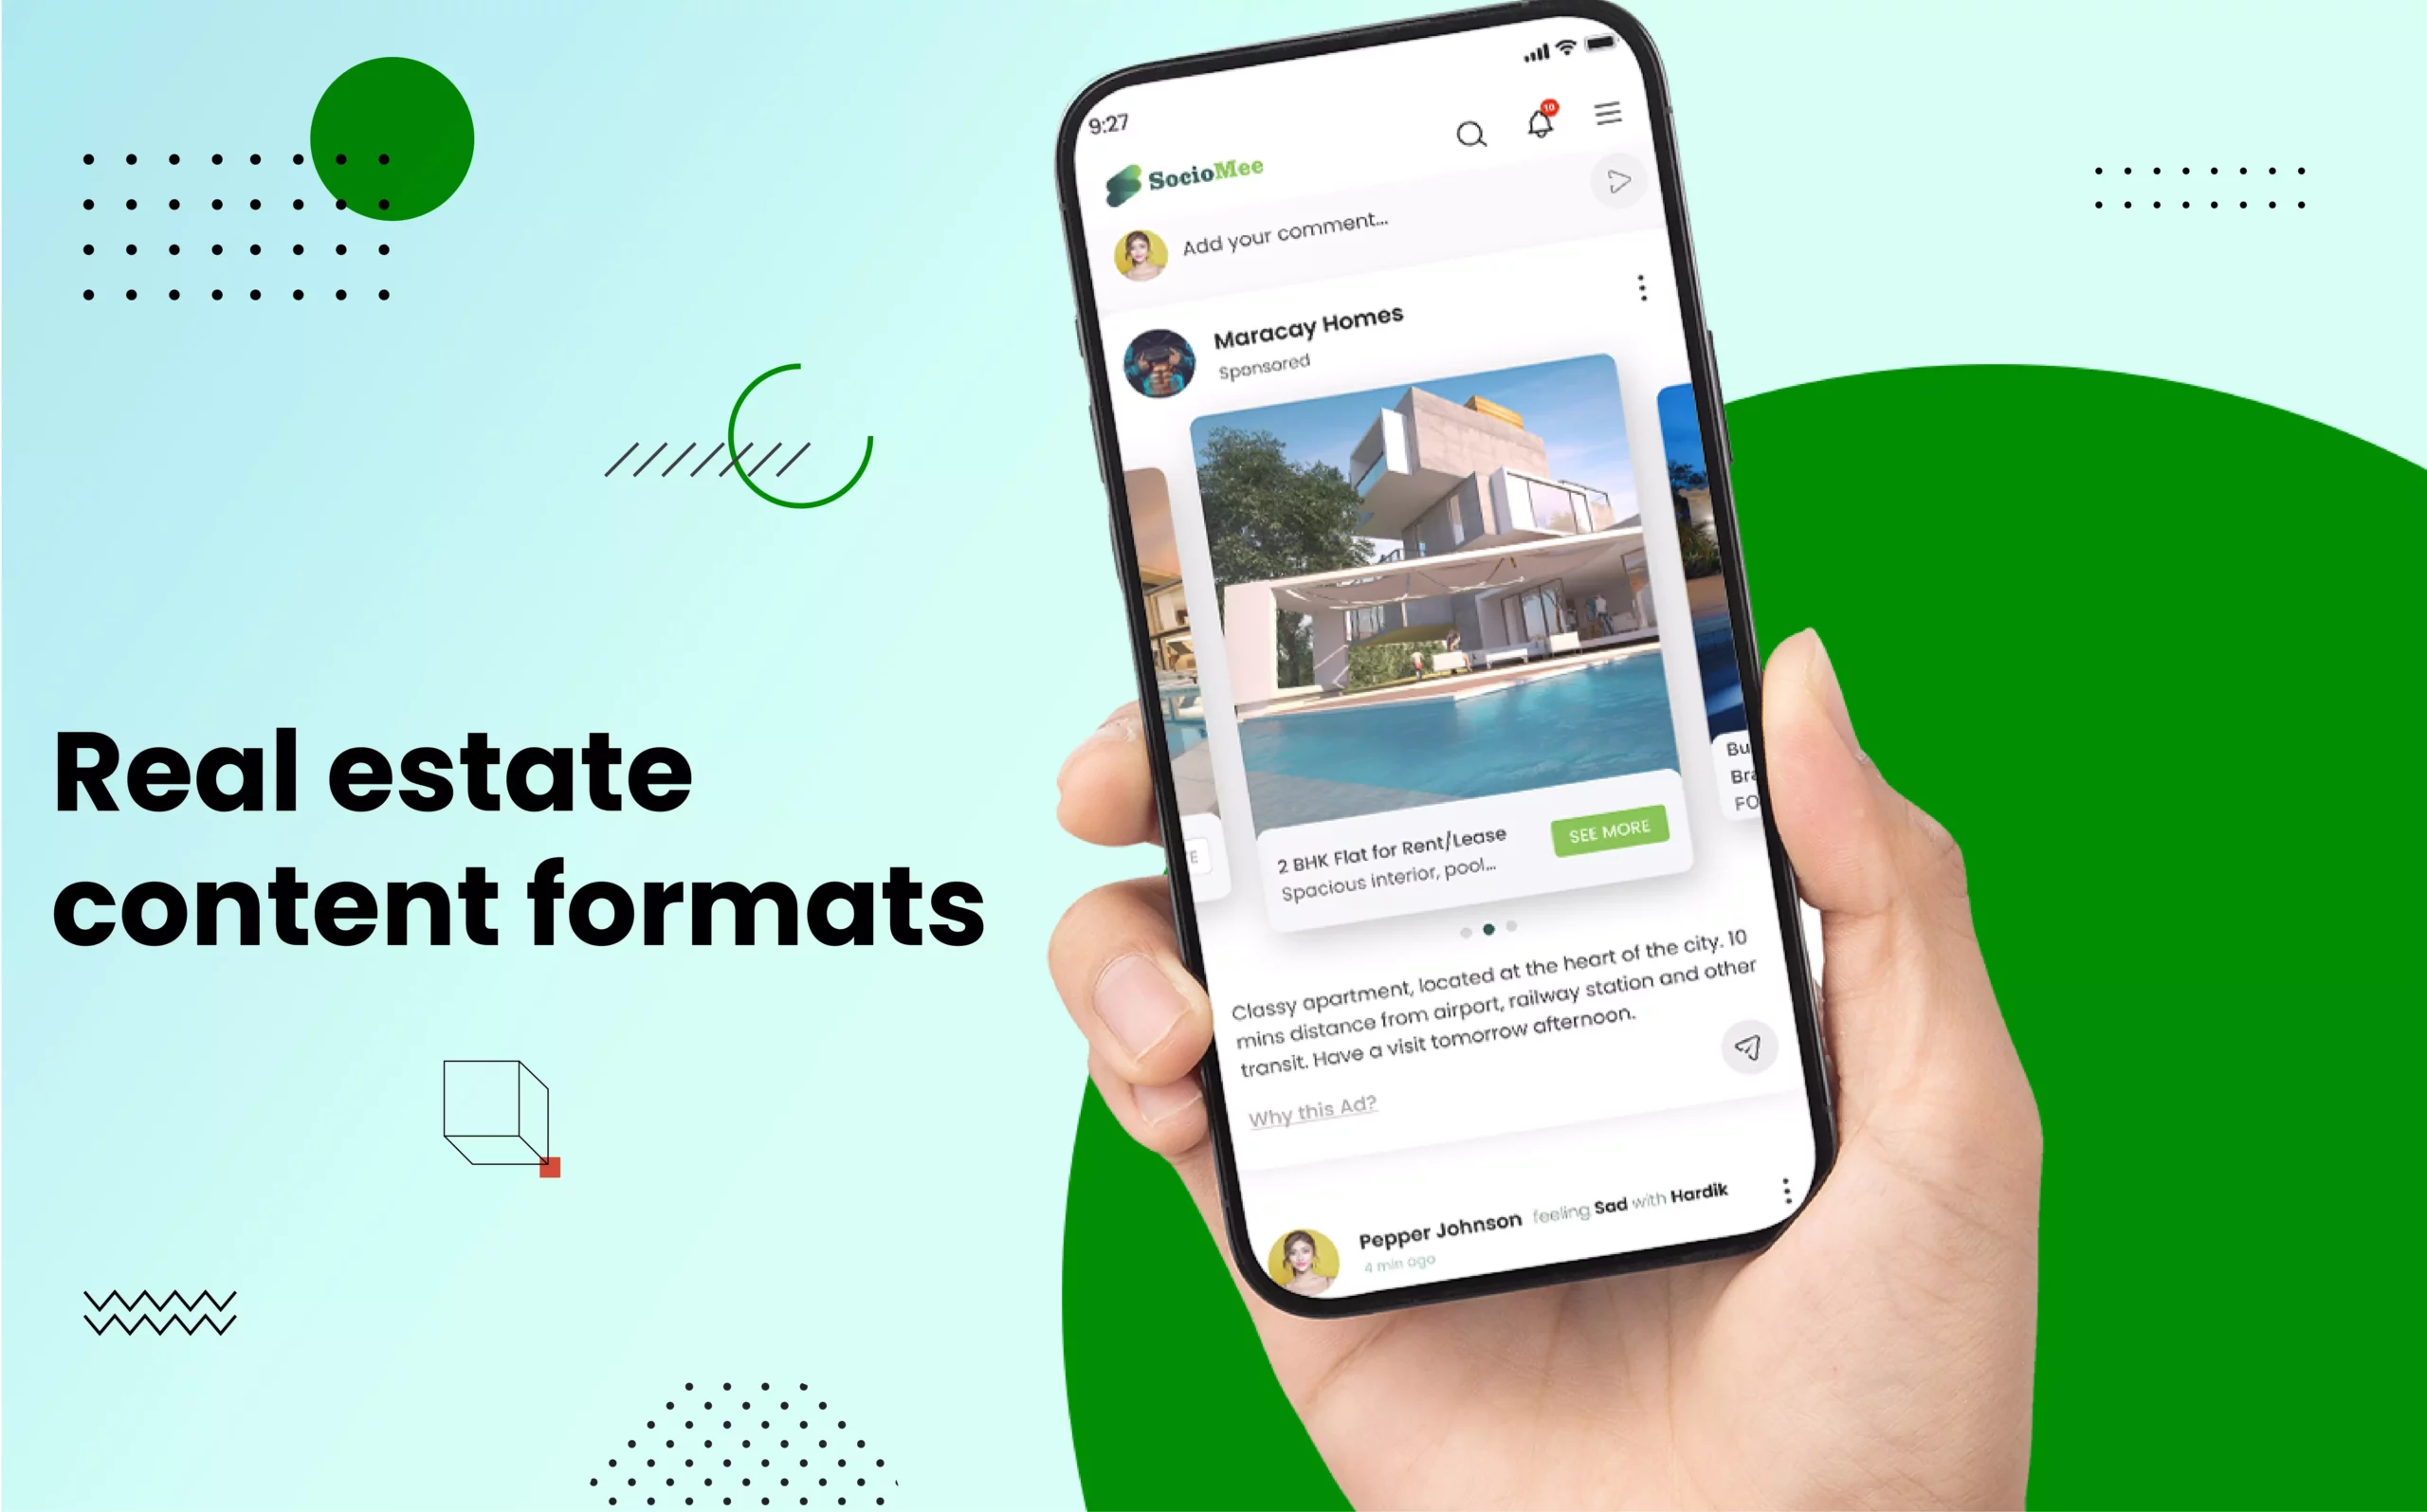 Real estate content formats